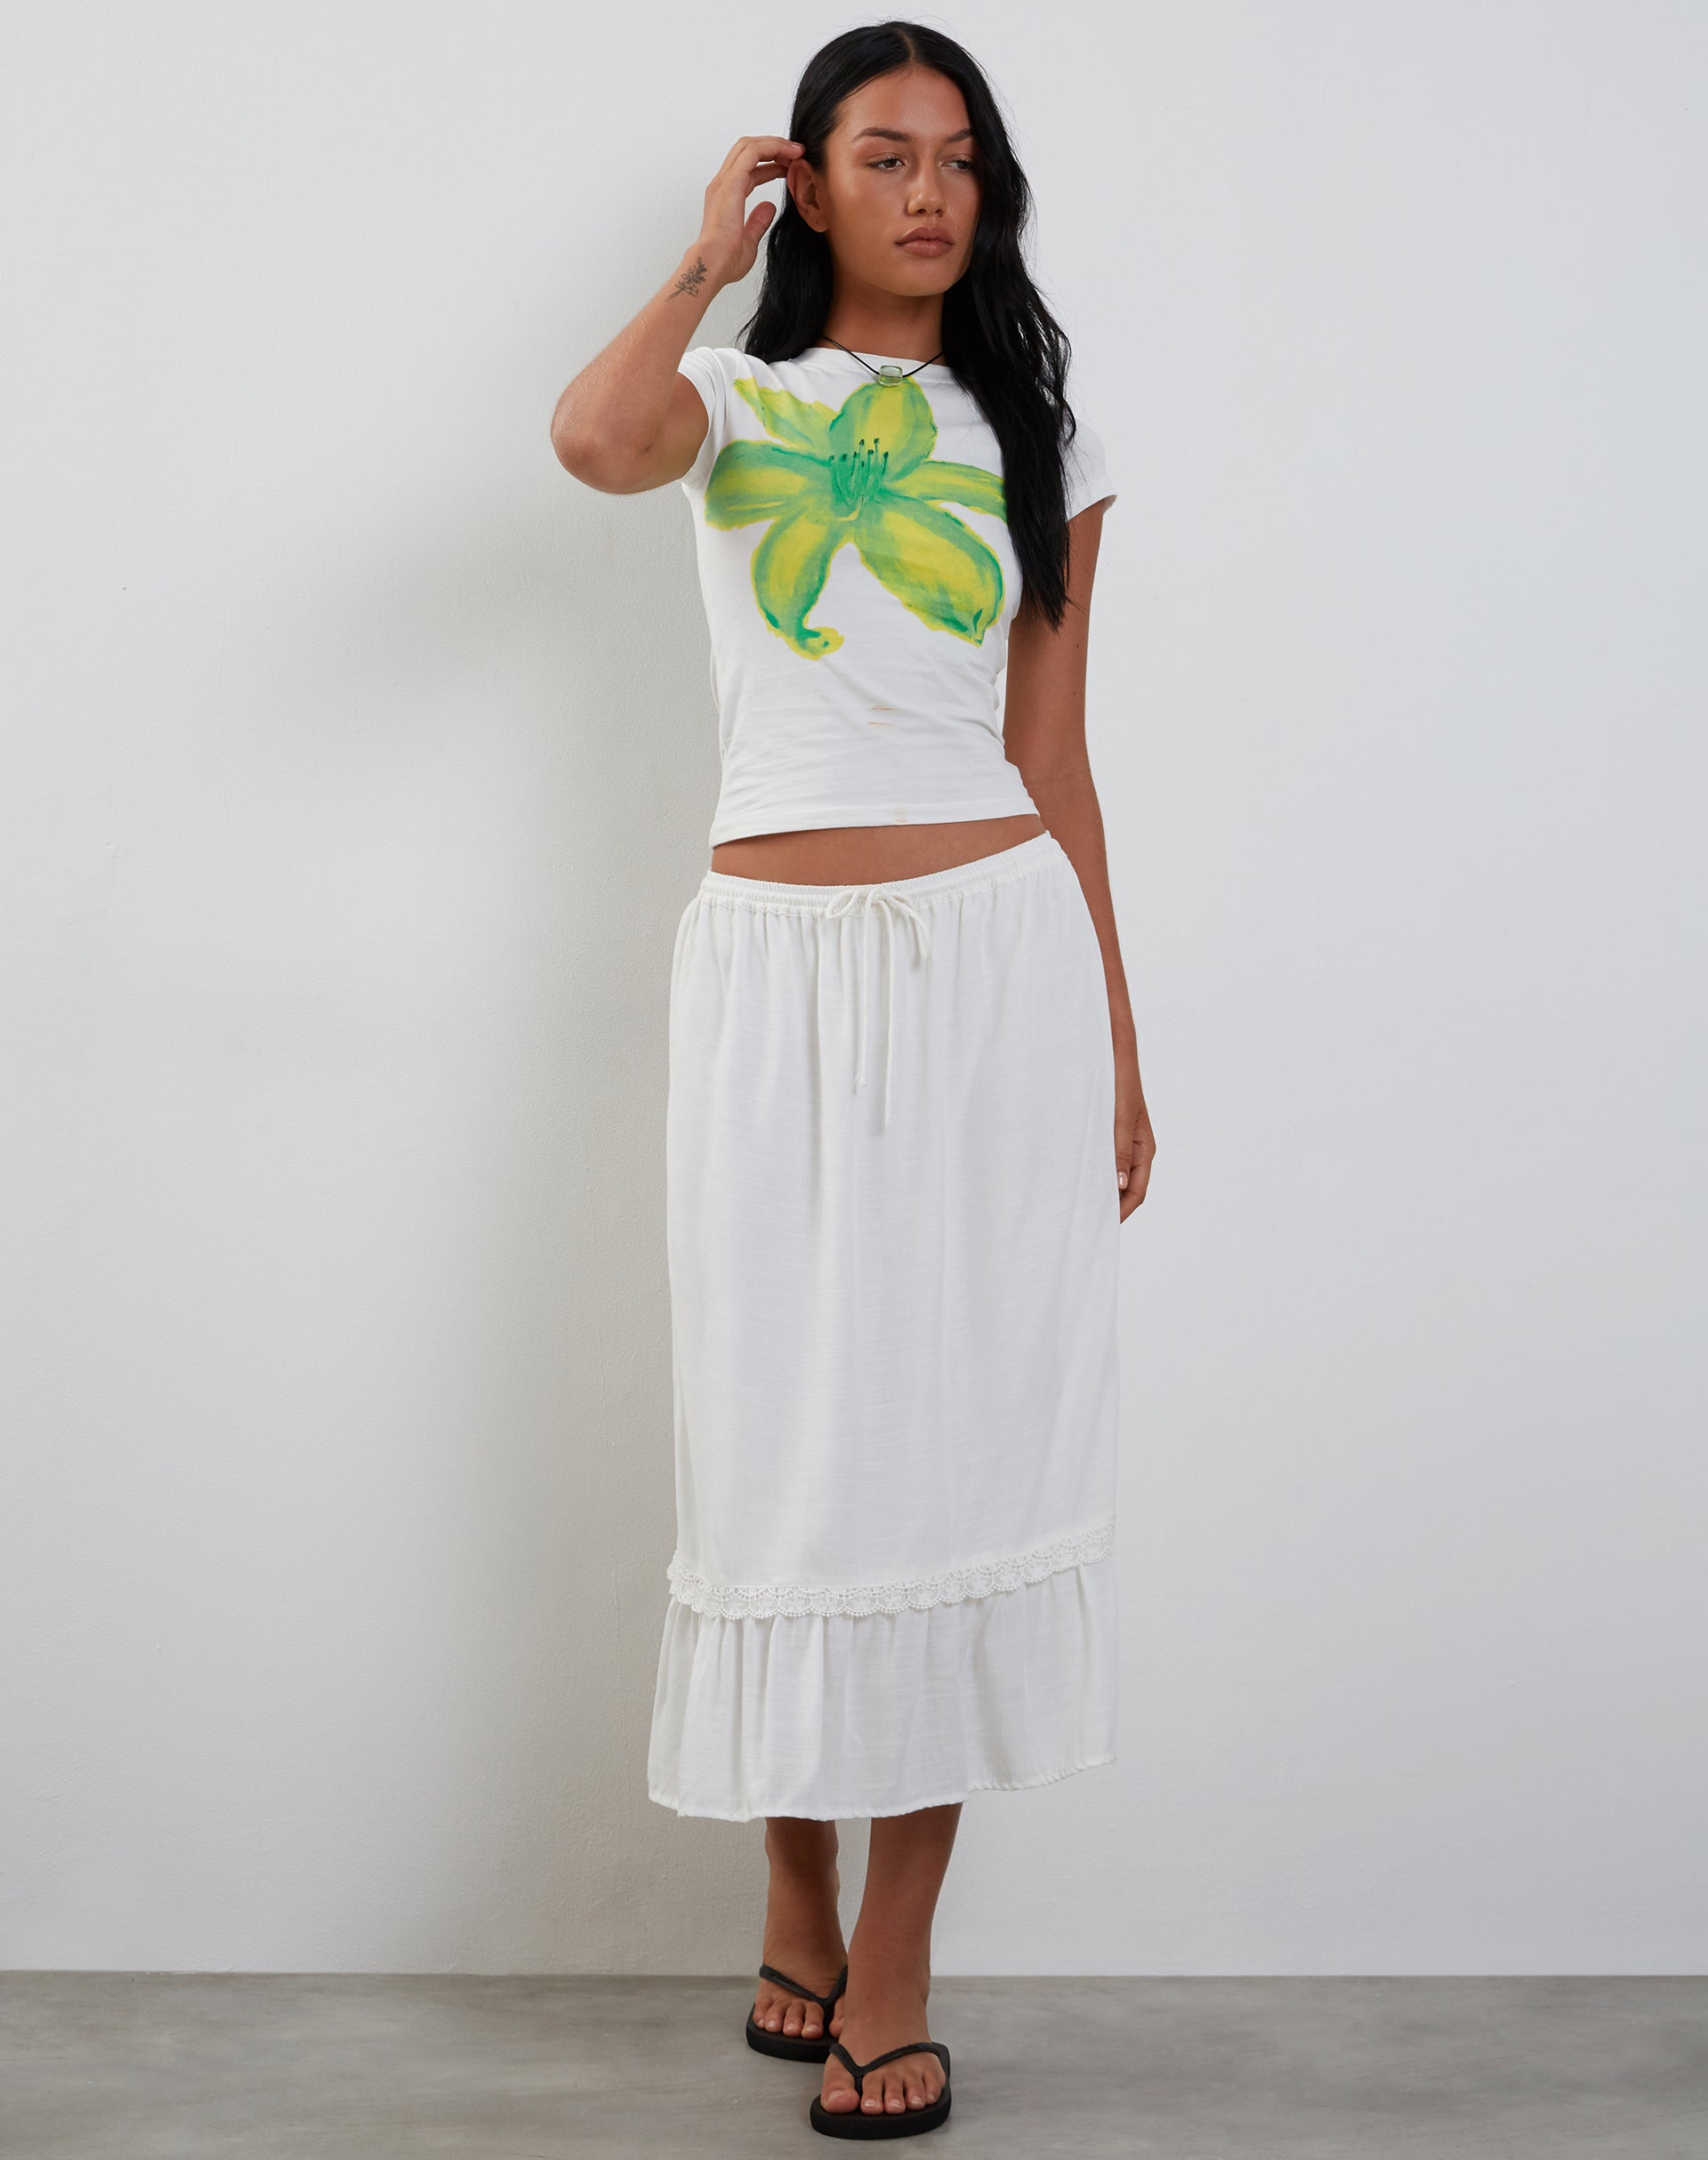 Image of Tiona Printed Tee in Summer Flower Lime